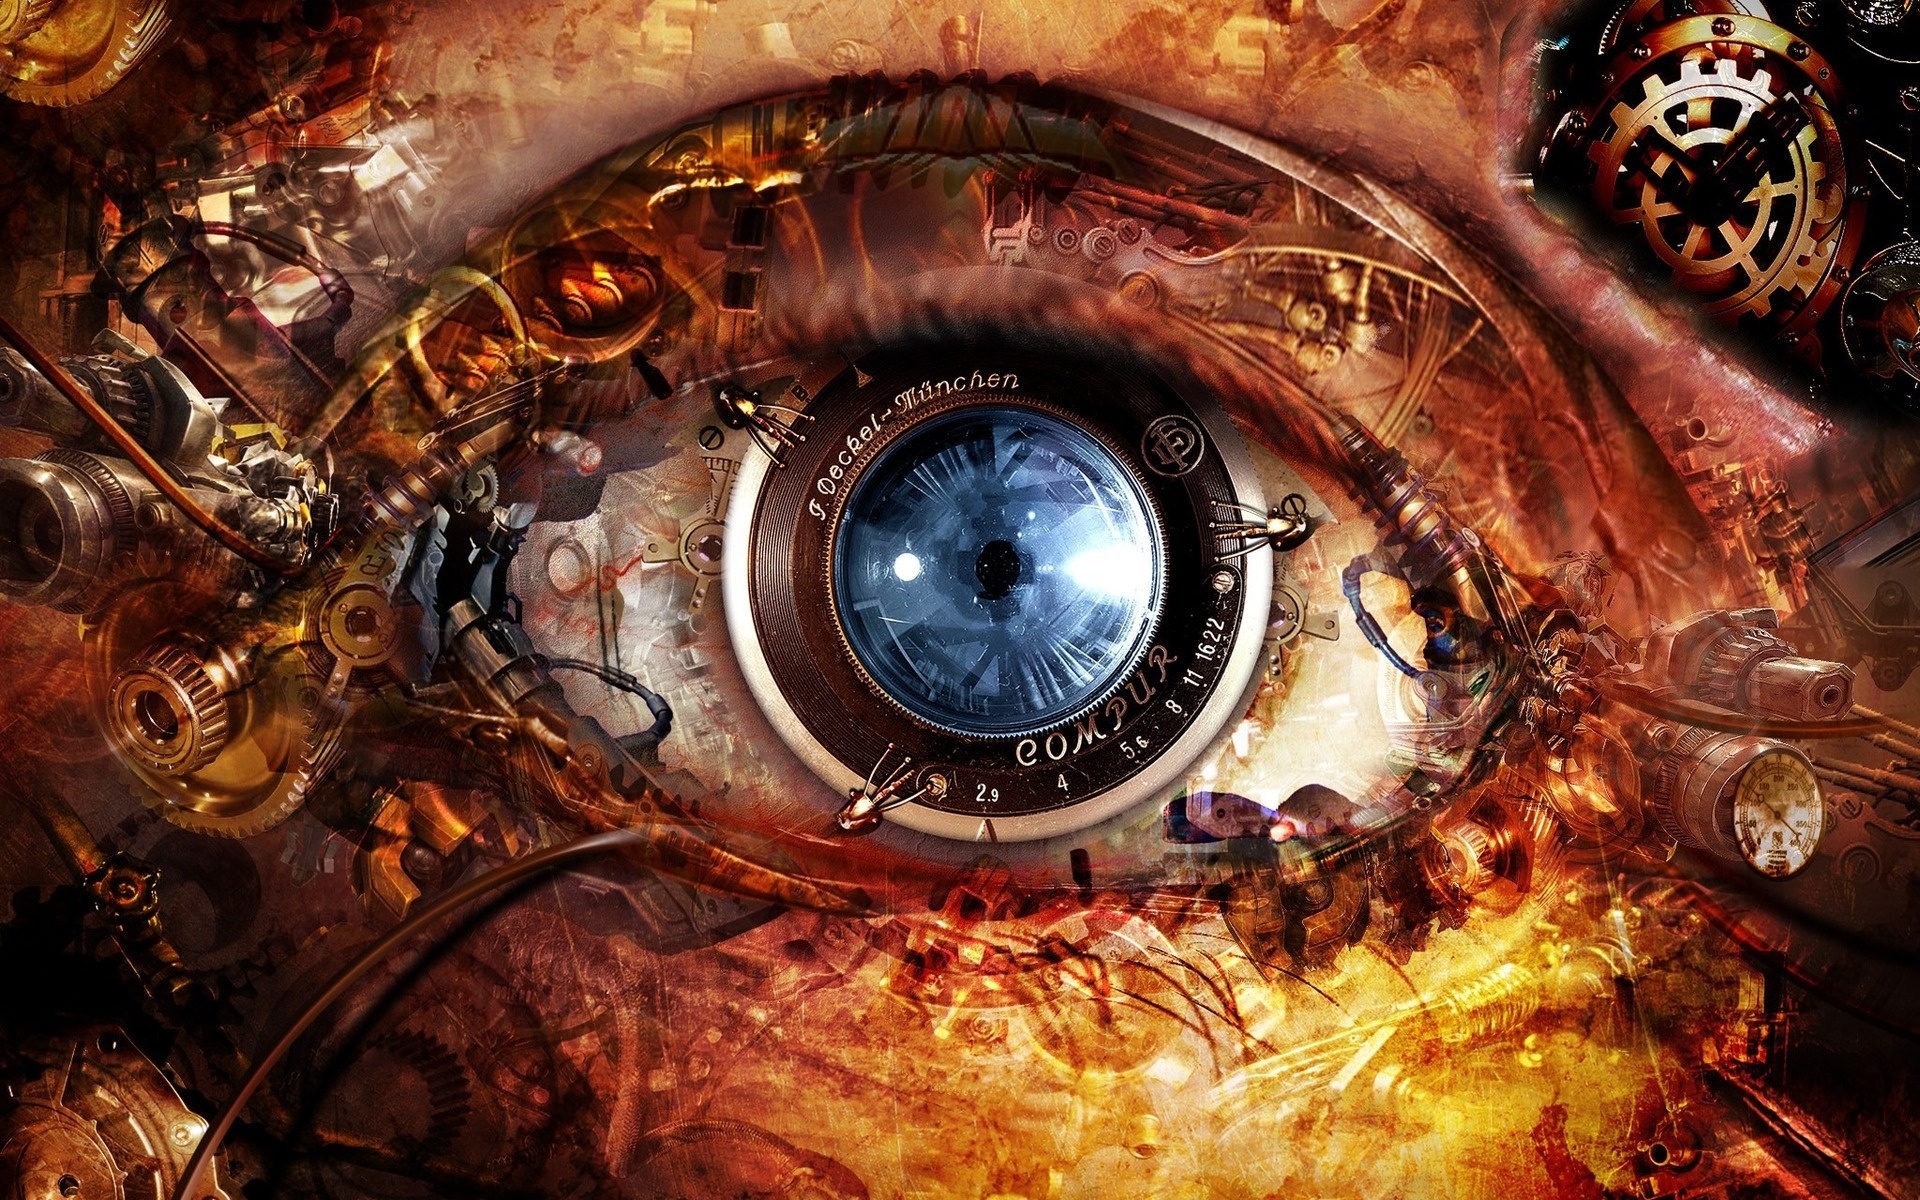 Mechanical eye wallpapers and images - wallpapers, pictures, photos